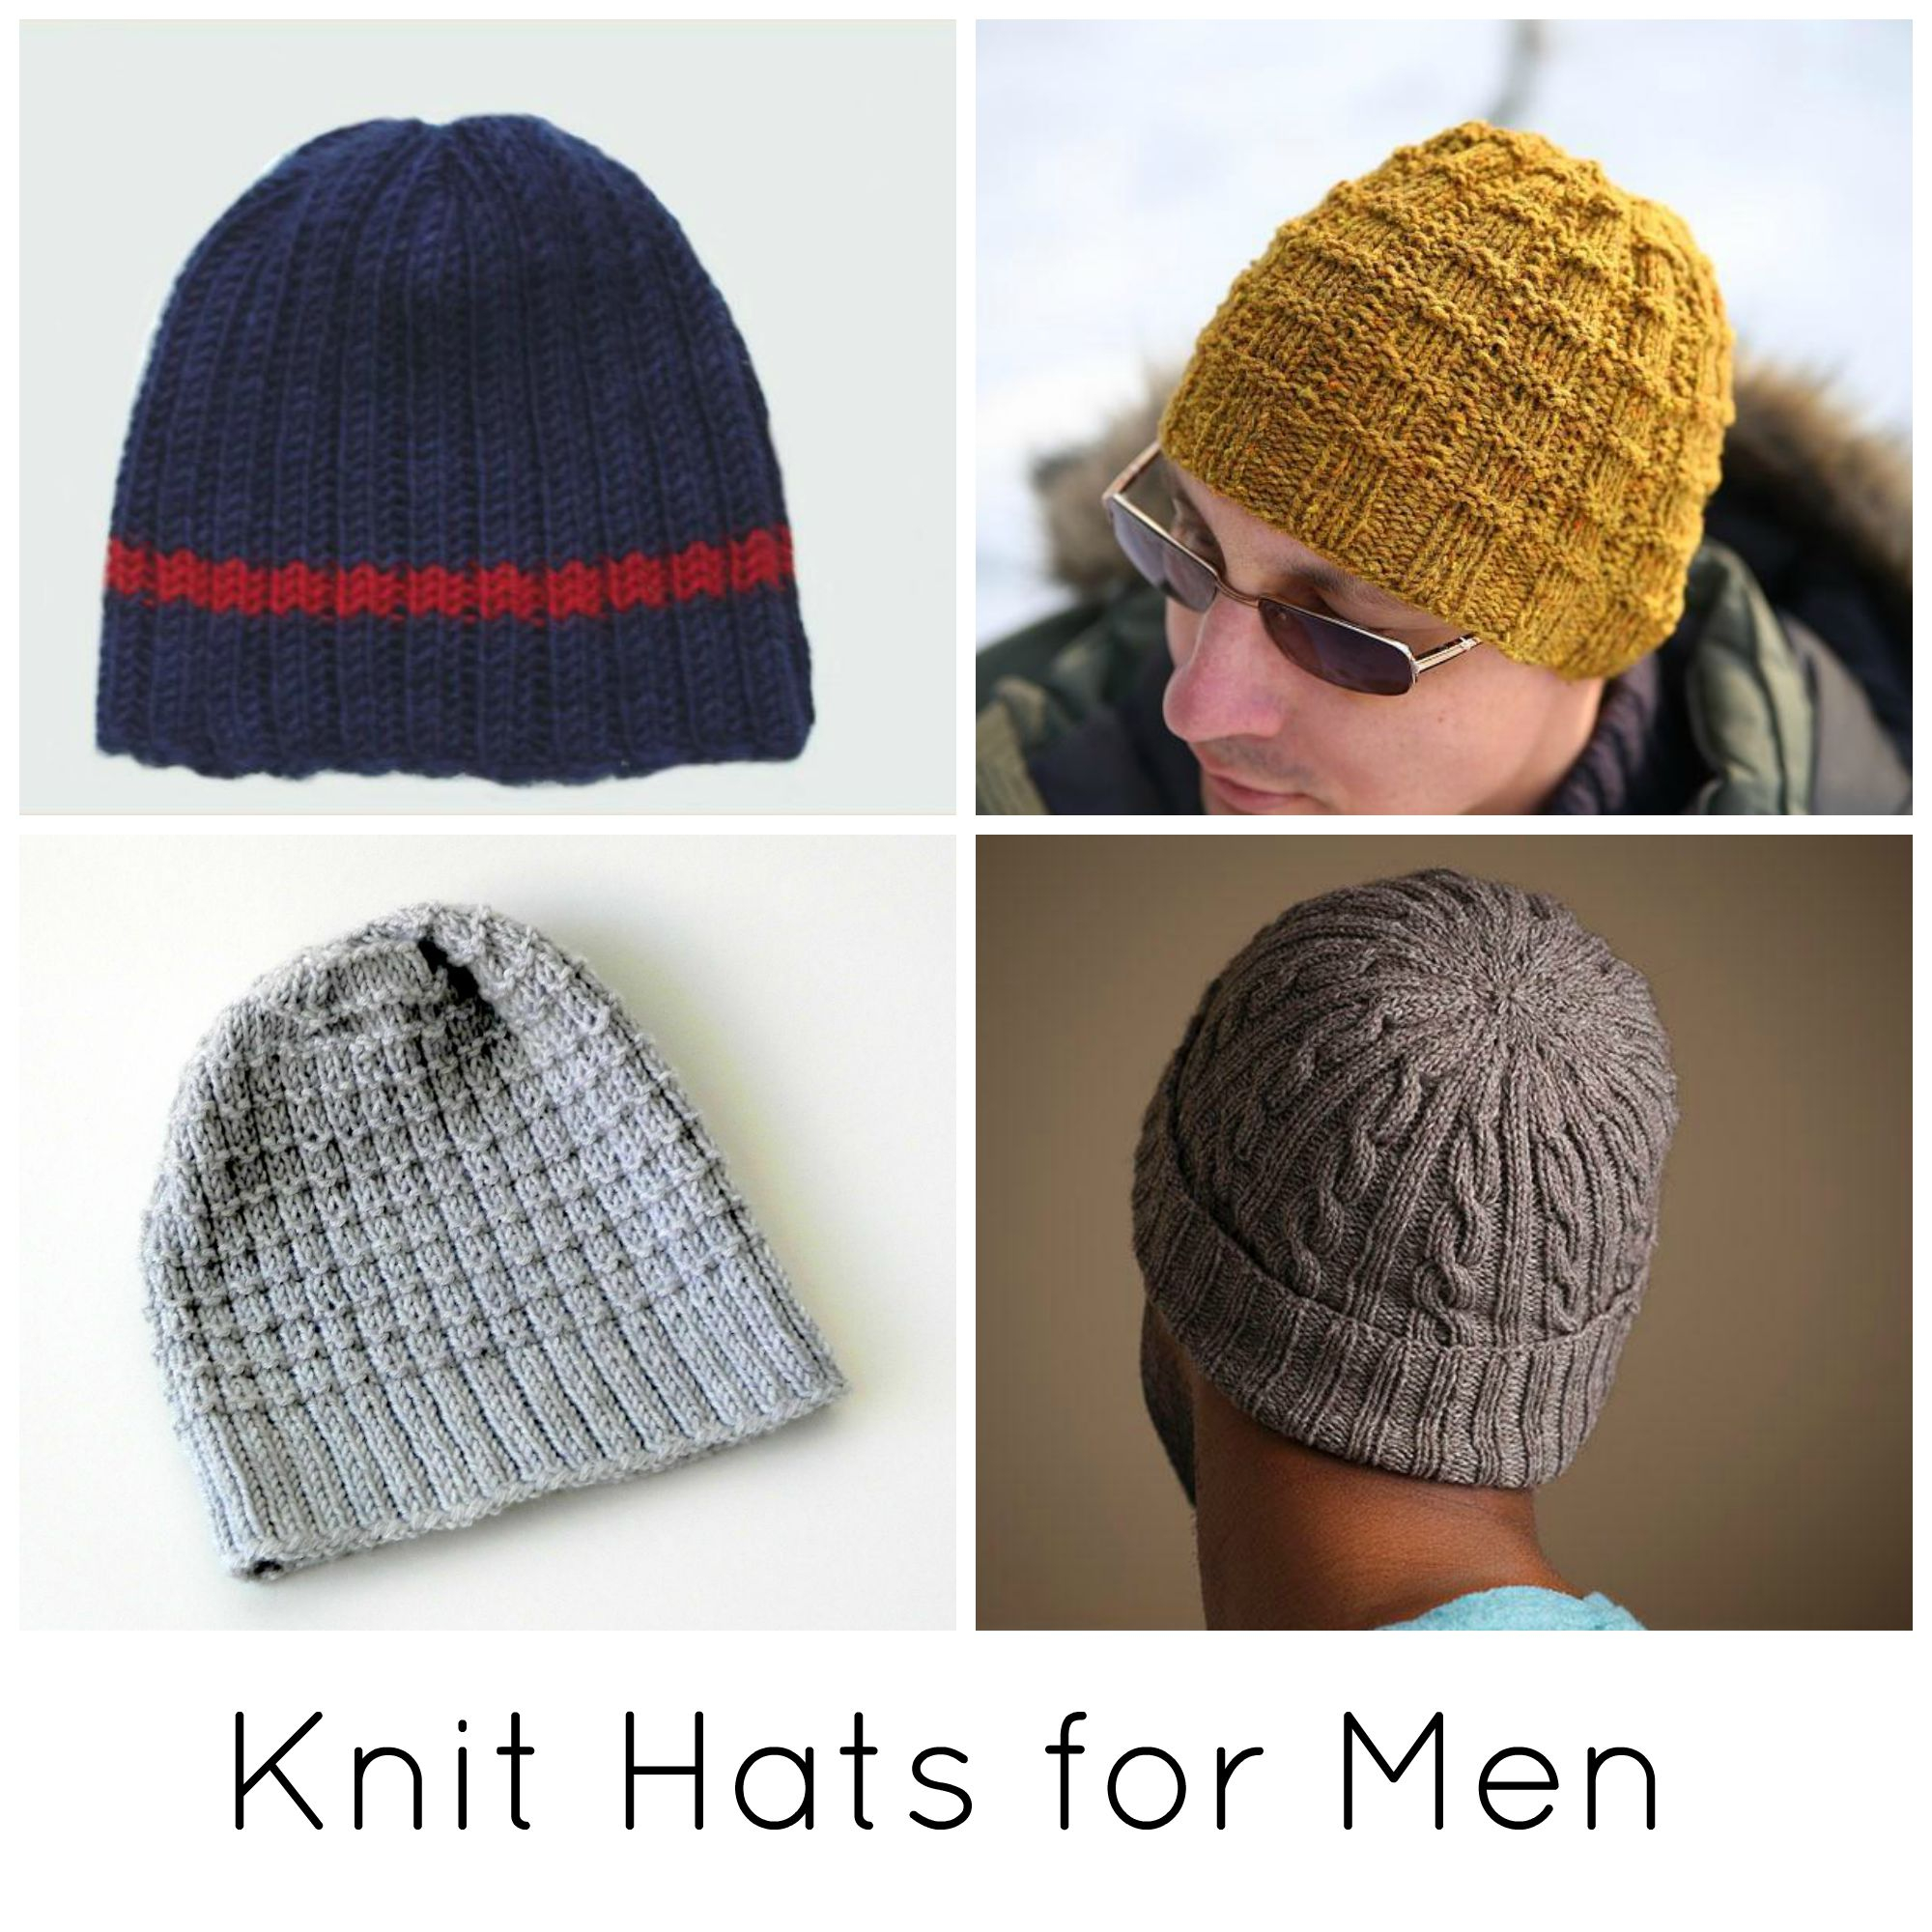 Knitted Beanie Hat Pattern 8 Knit Hats For Men From Adventurous To Classic